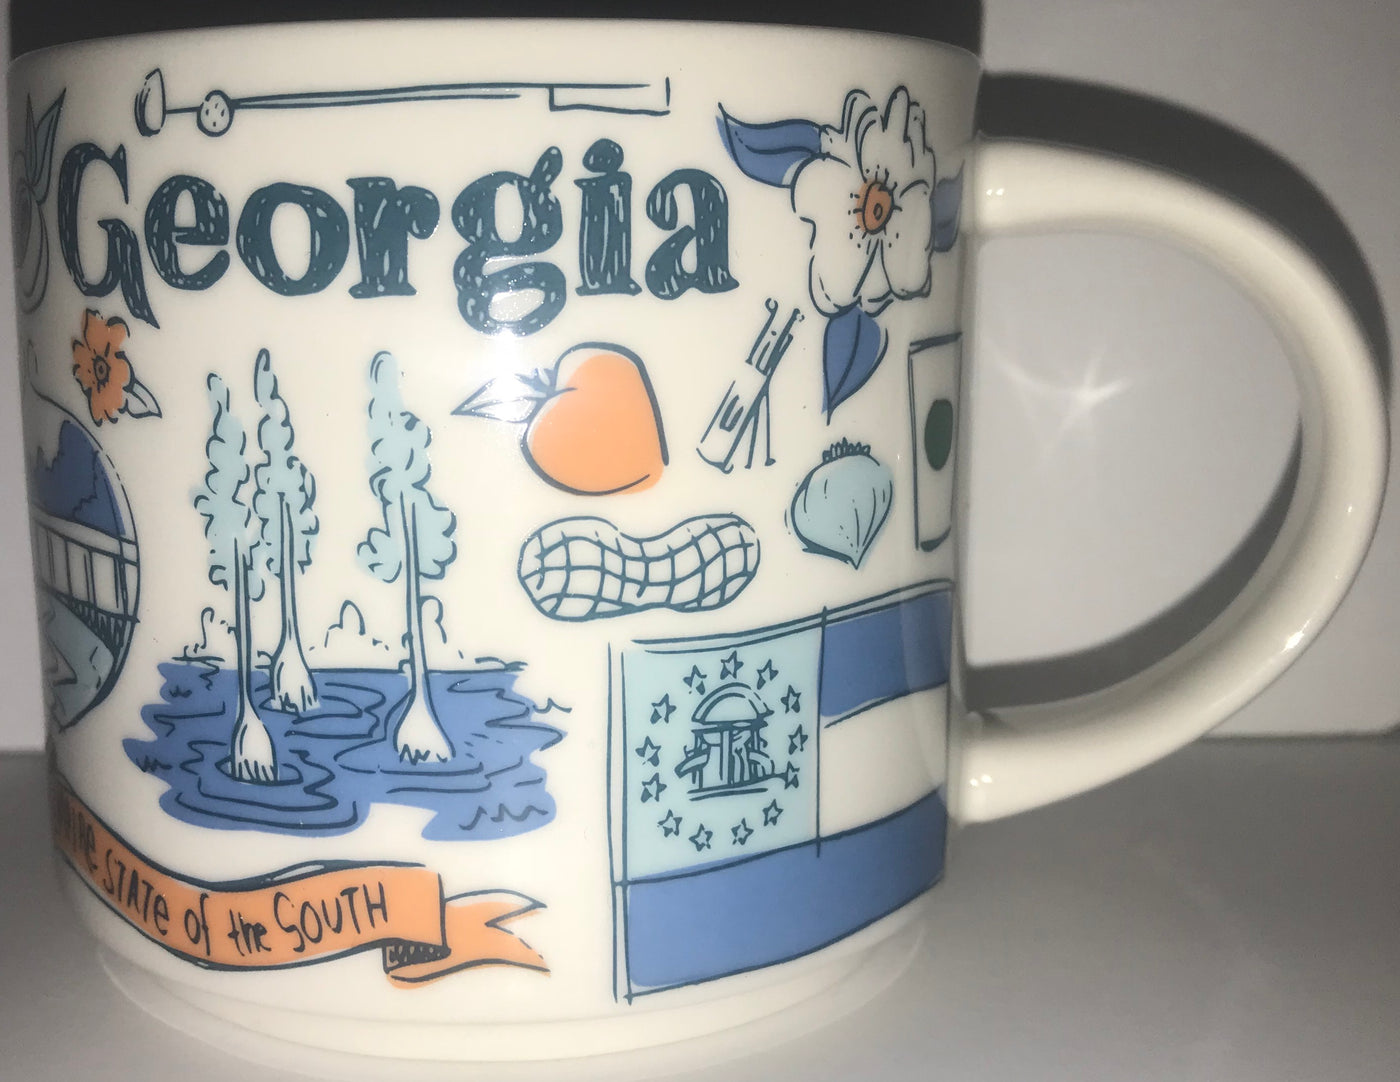 Starbucks Been There Series Collection Georgia Coffee Mug New With Box